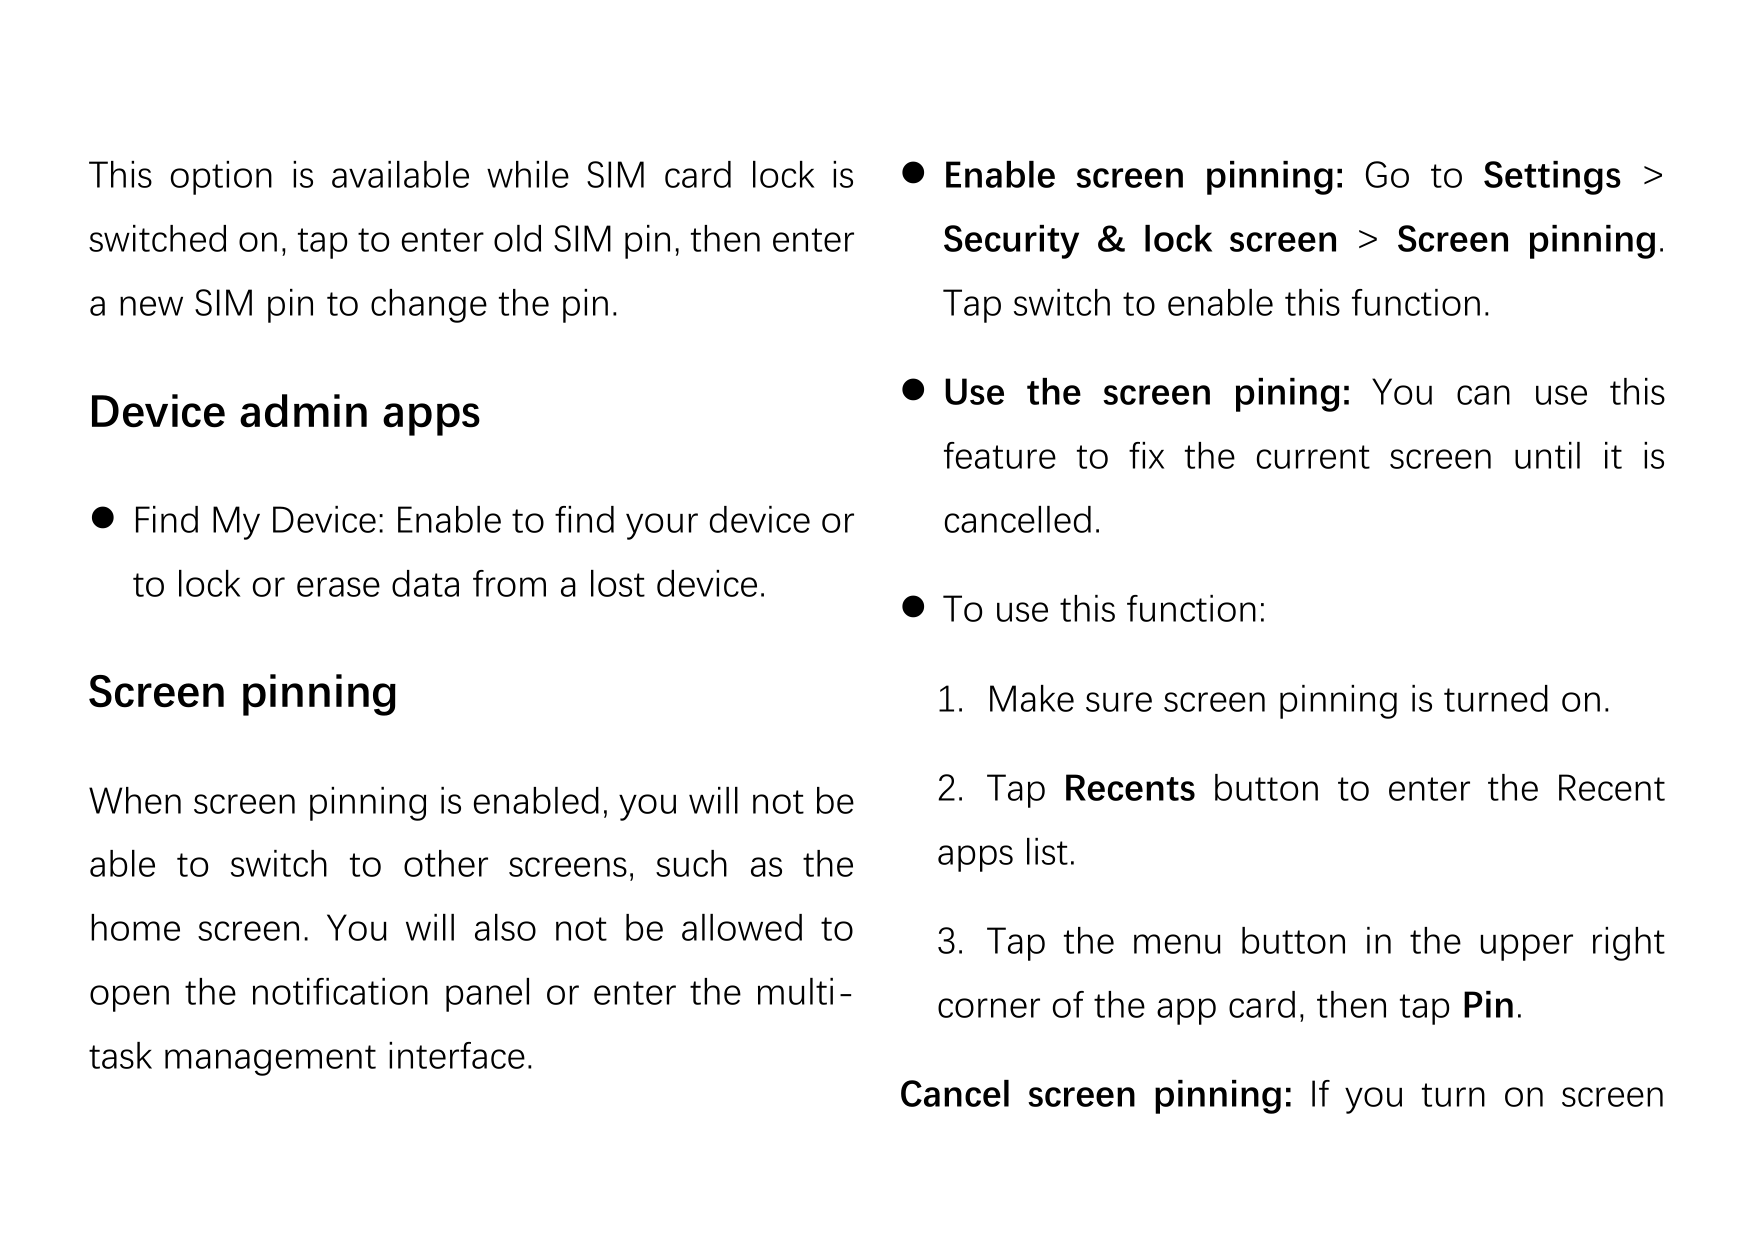 This option is available while SIM card lock is Enable screen pinning: Go to Settings >switched on, tap to enter old SIM pin, t